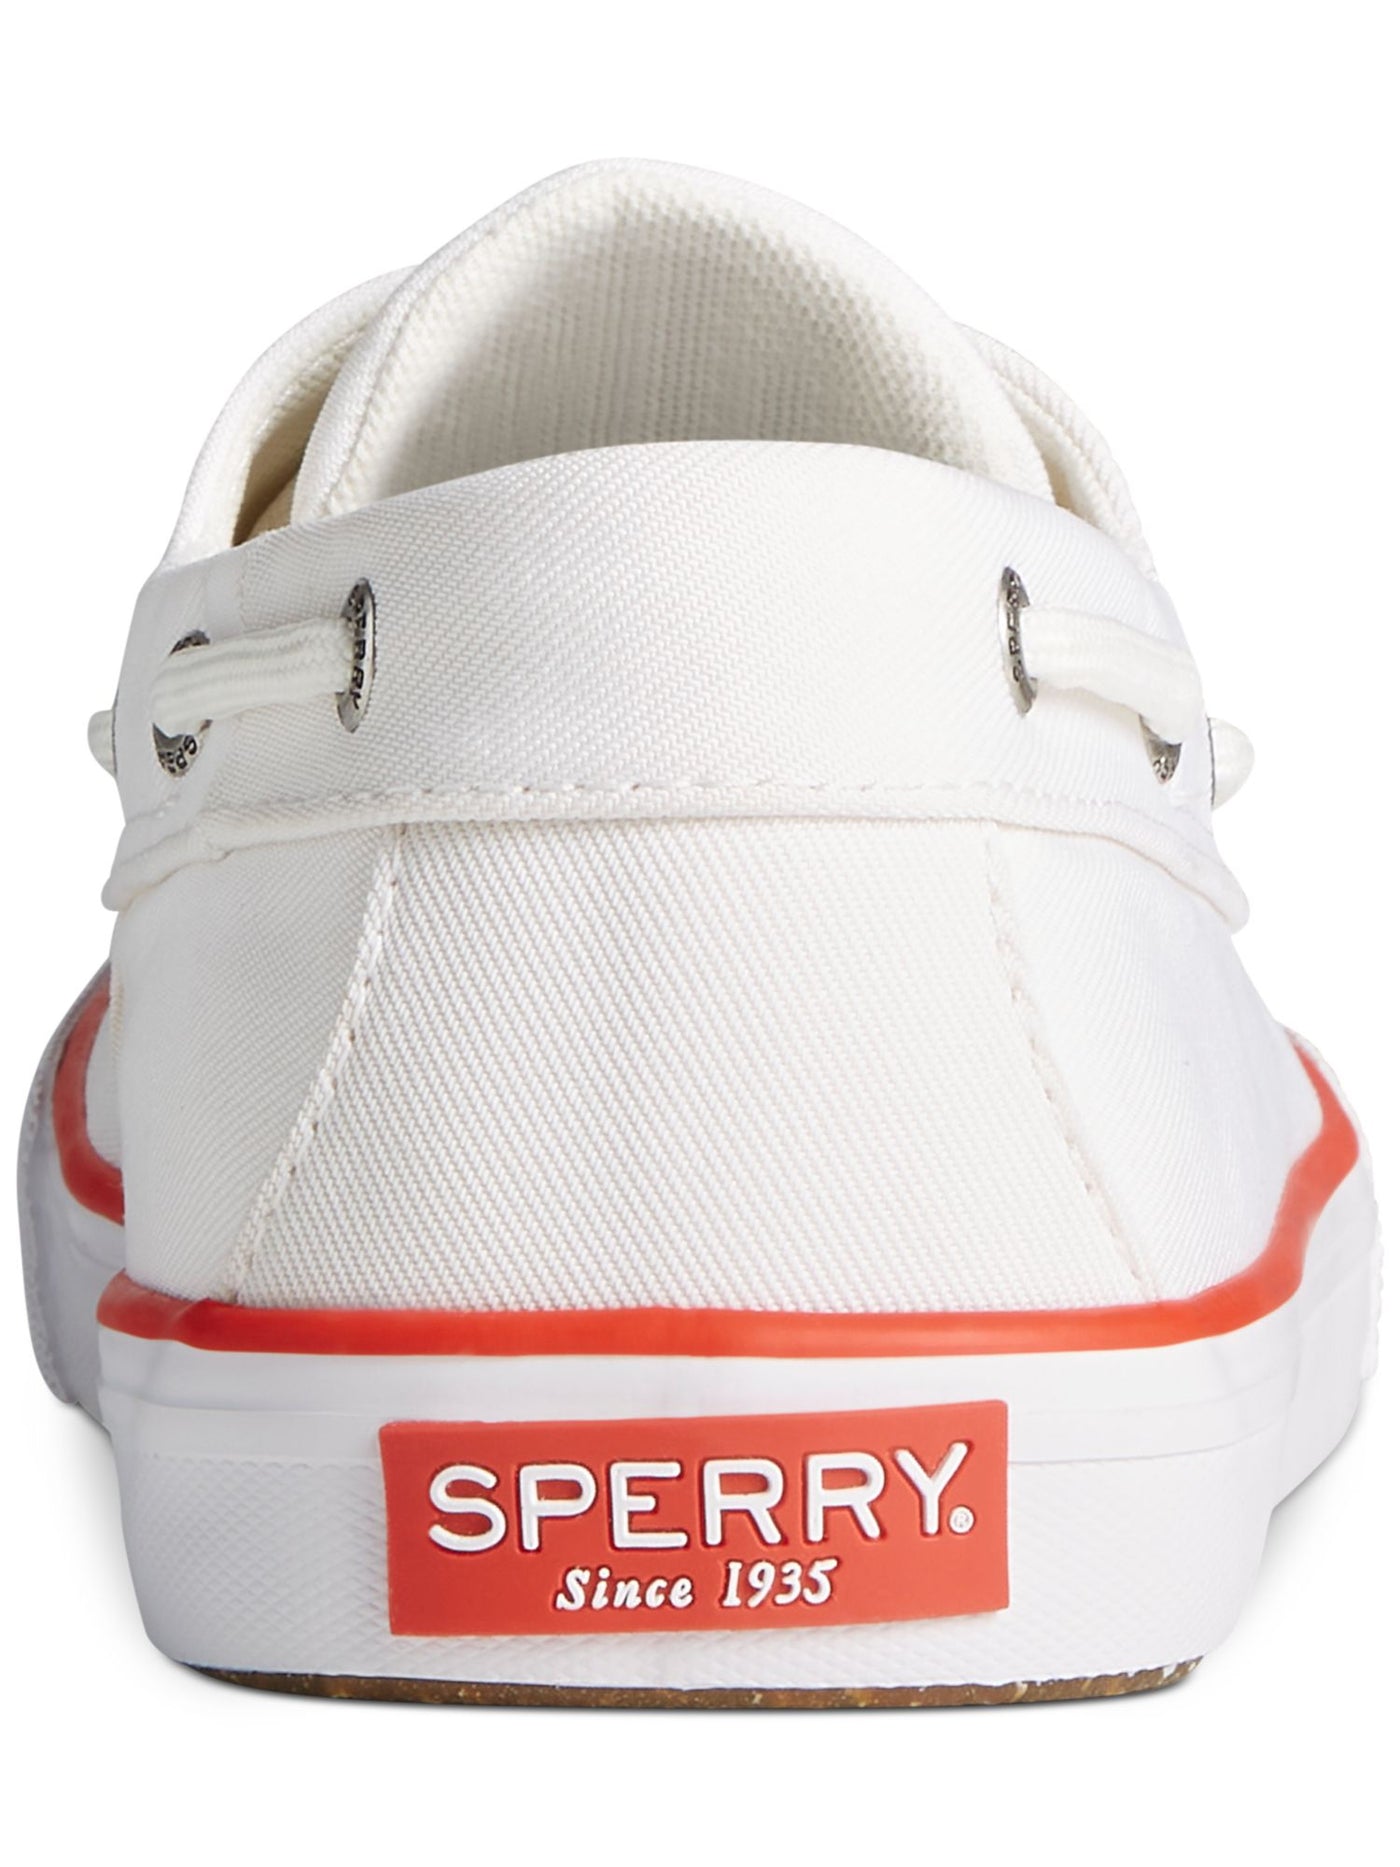 SPERRY Mens White Non-Marking Removable Insole Bahama Round Toe Lace-Up Boat Shoes 12 M